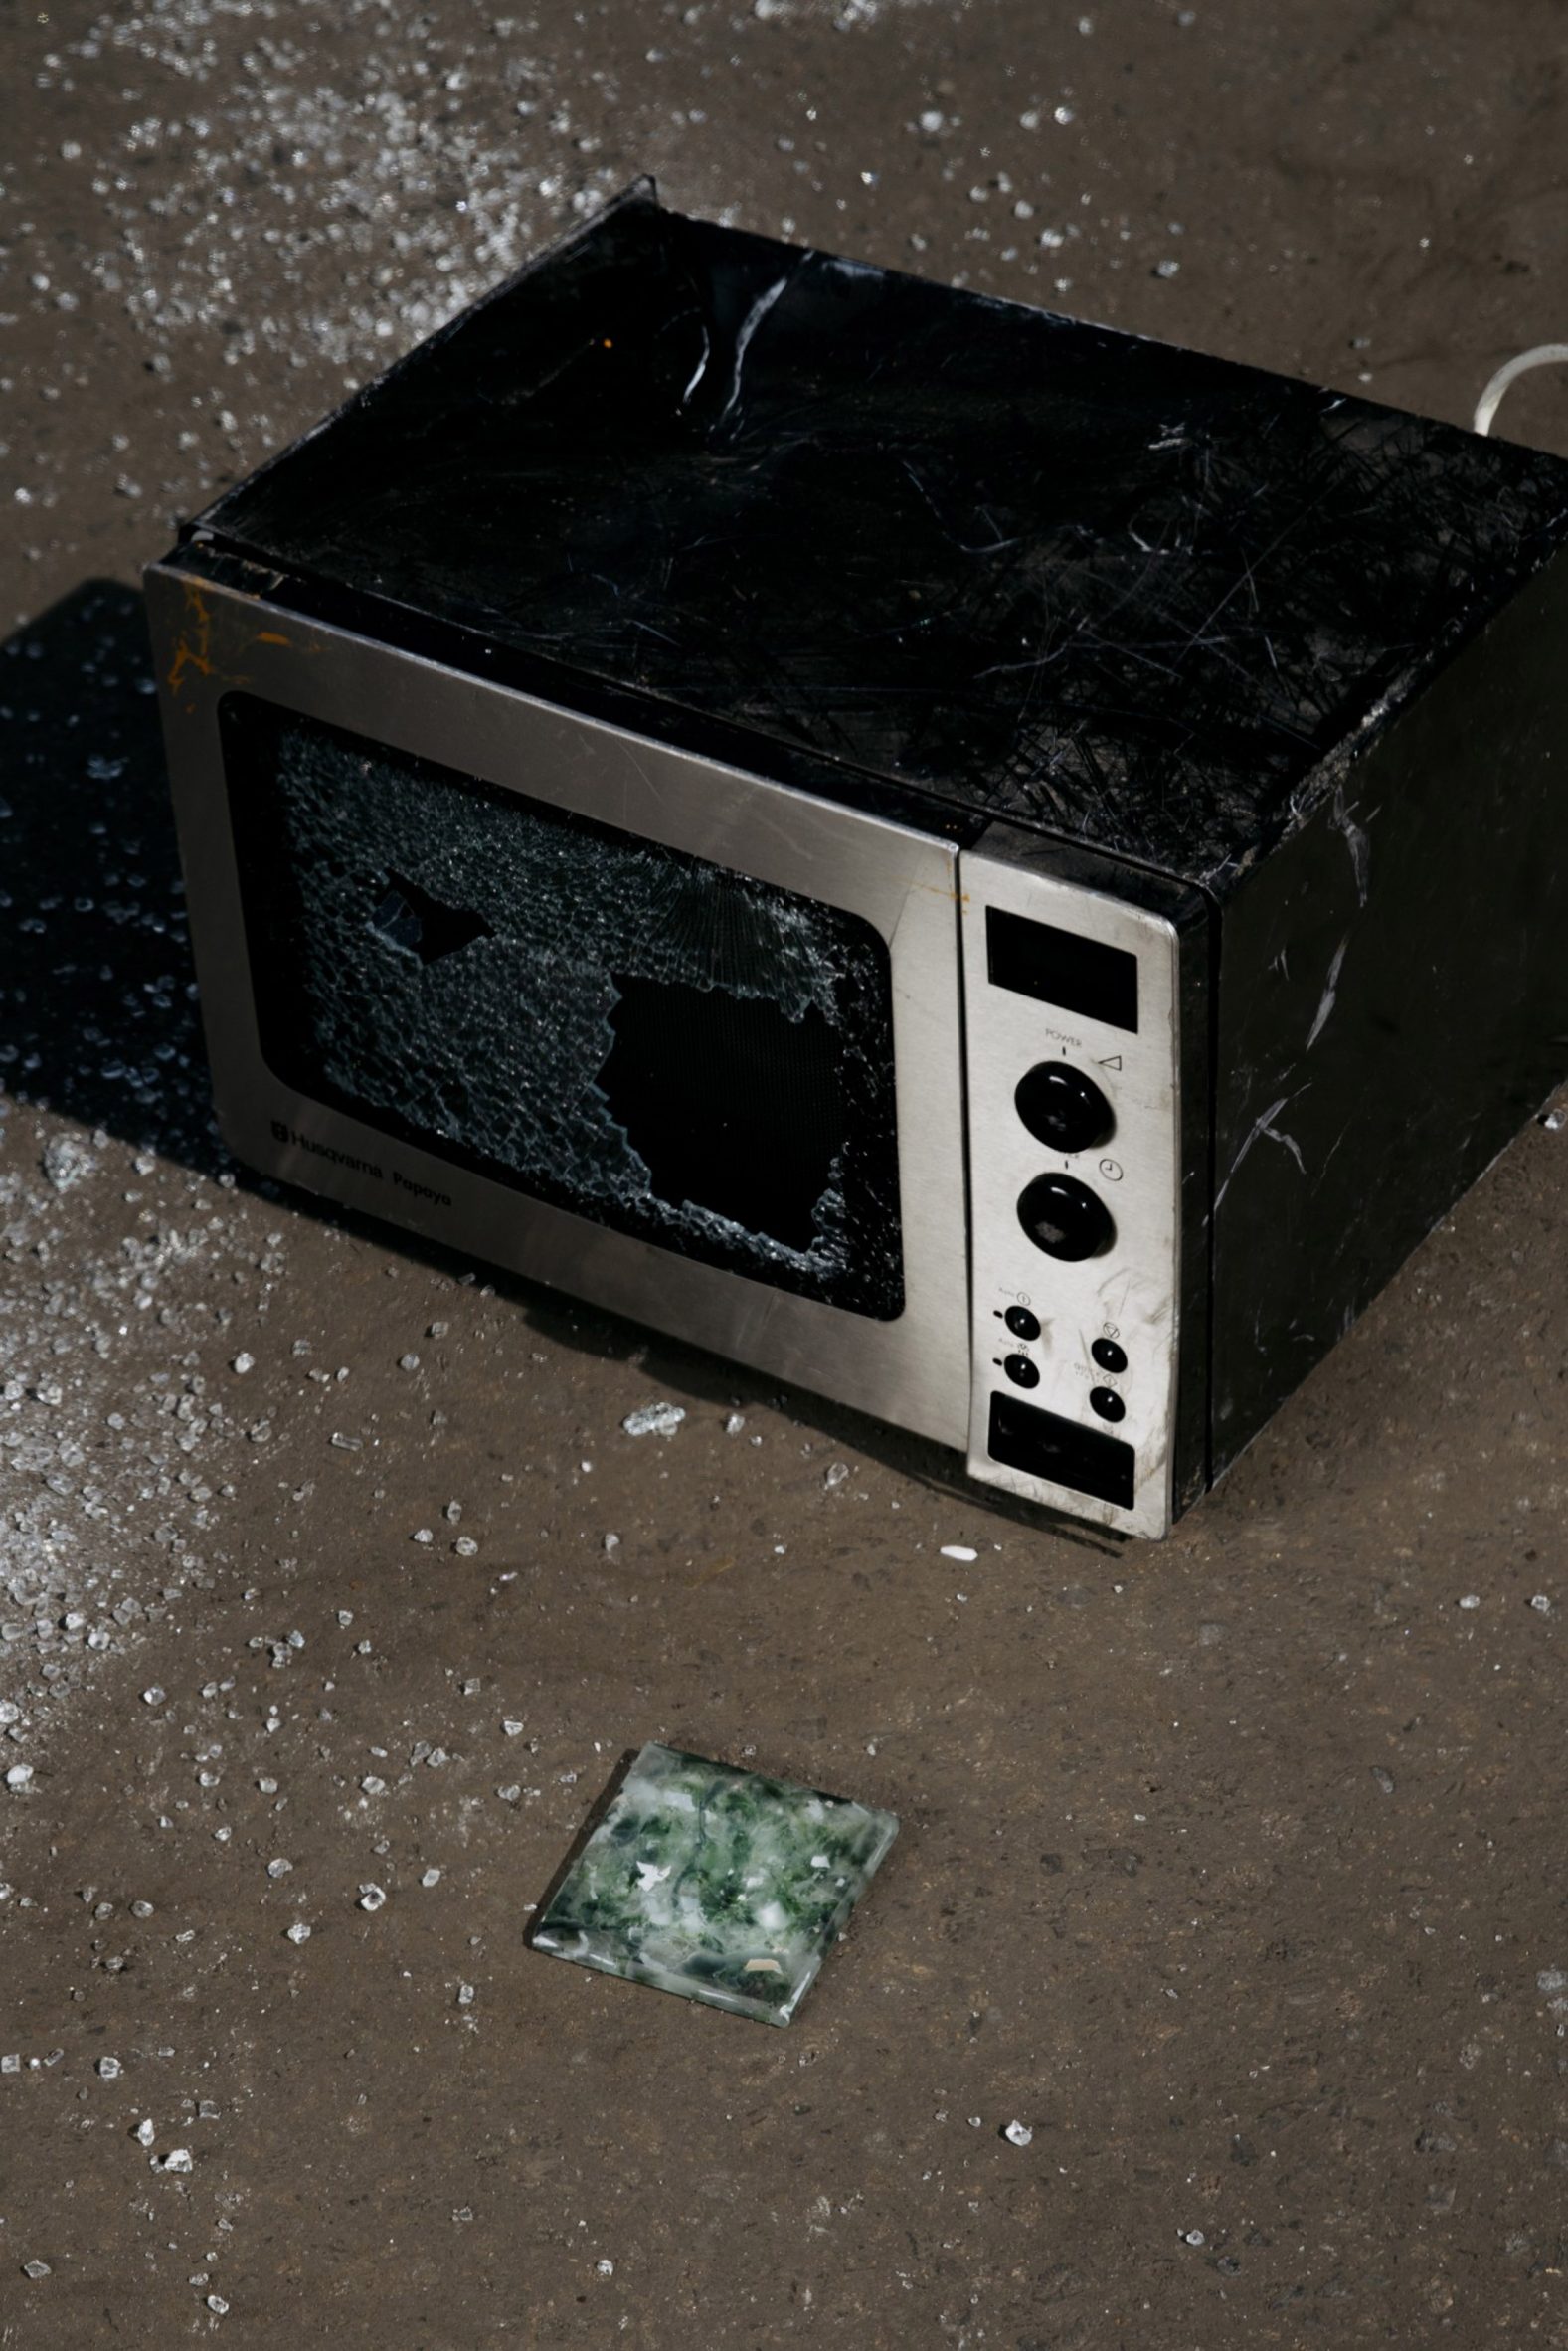 Microwave with shattered glass next to a Forite tile